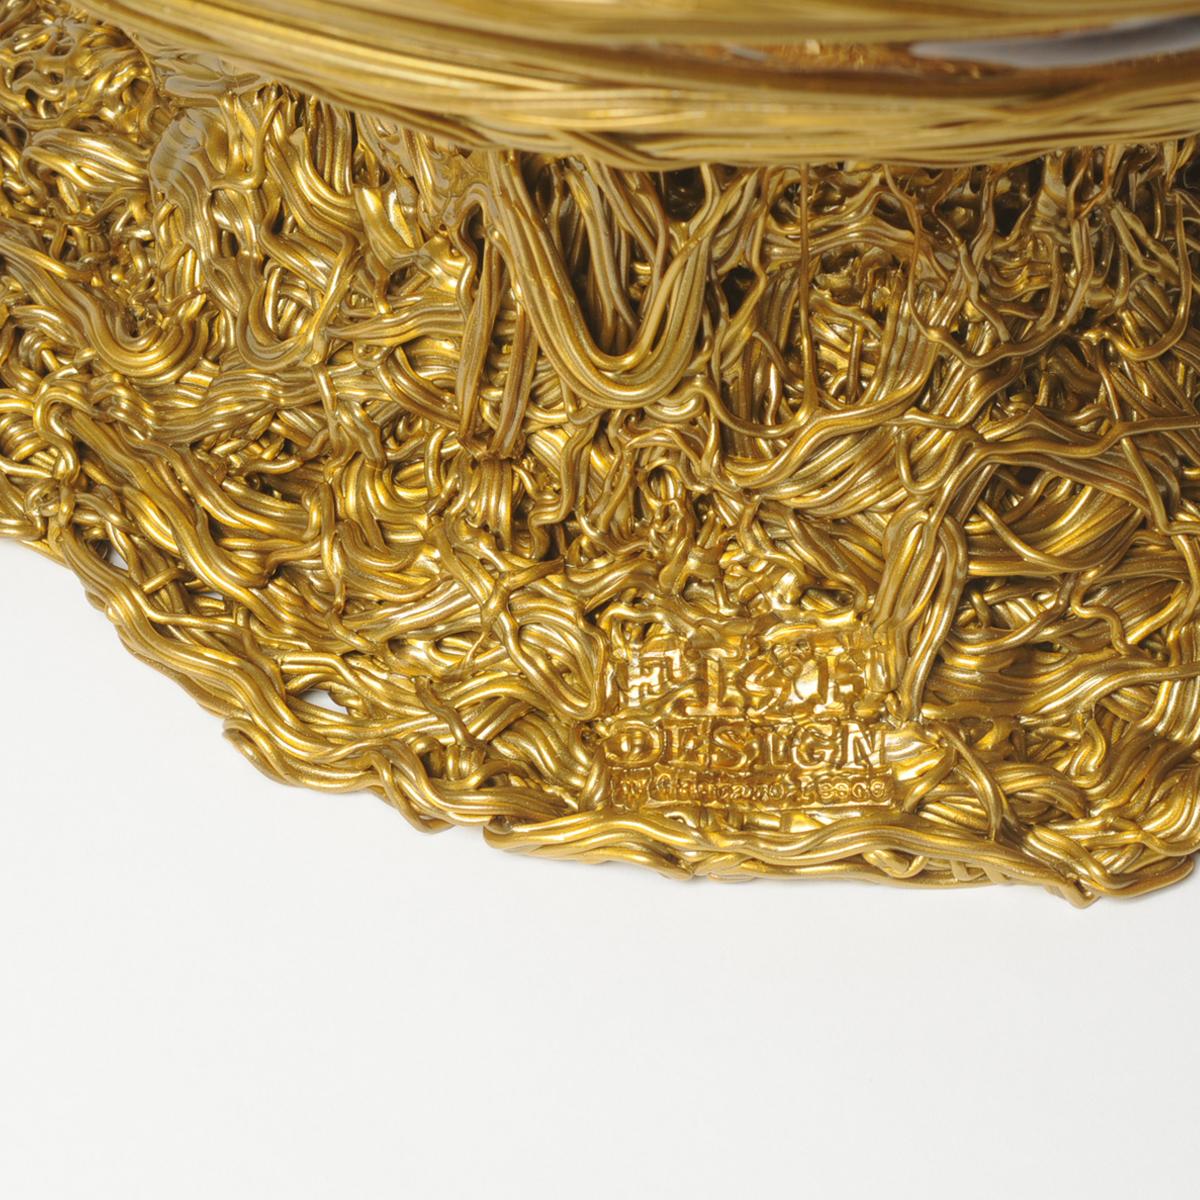 Ogiva XL Resin Basket in Clear and Gold by Gaetano Pesce In New Condition For Sale In barasso, IT